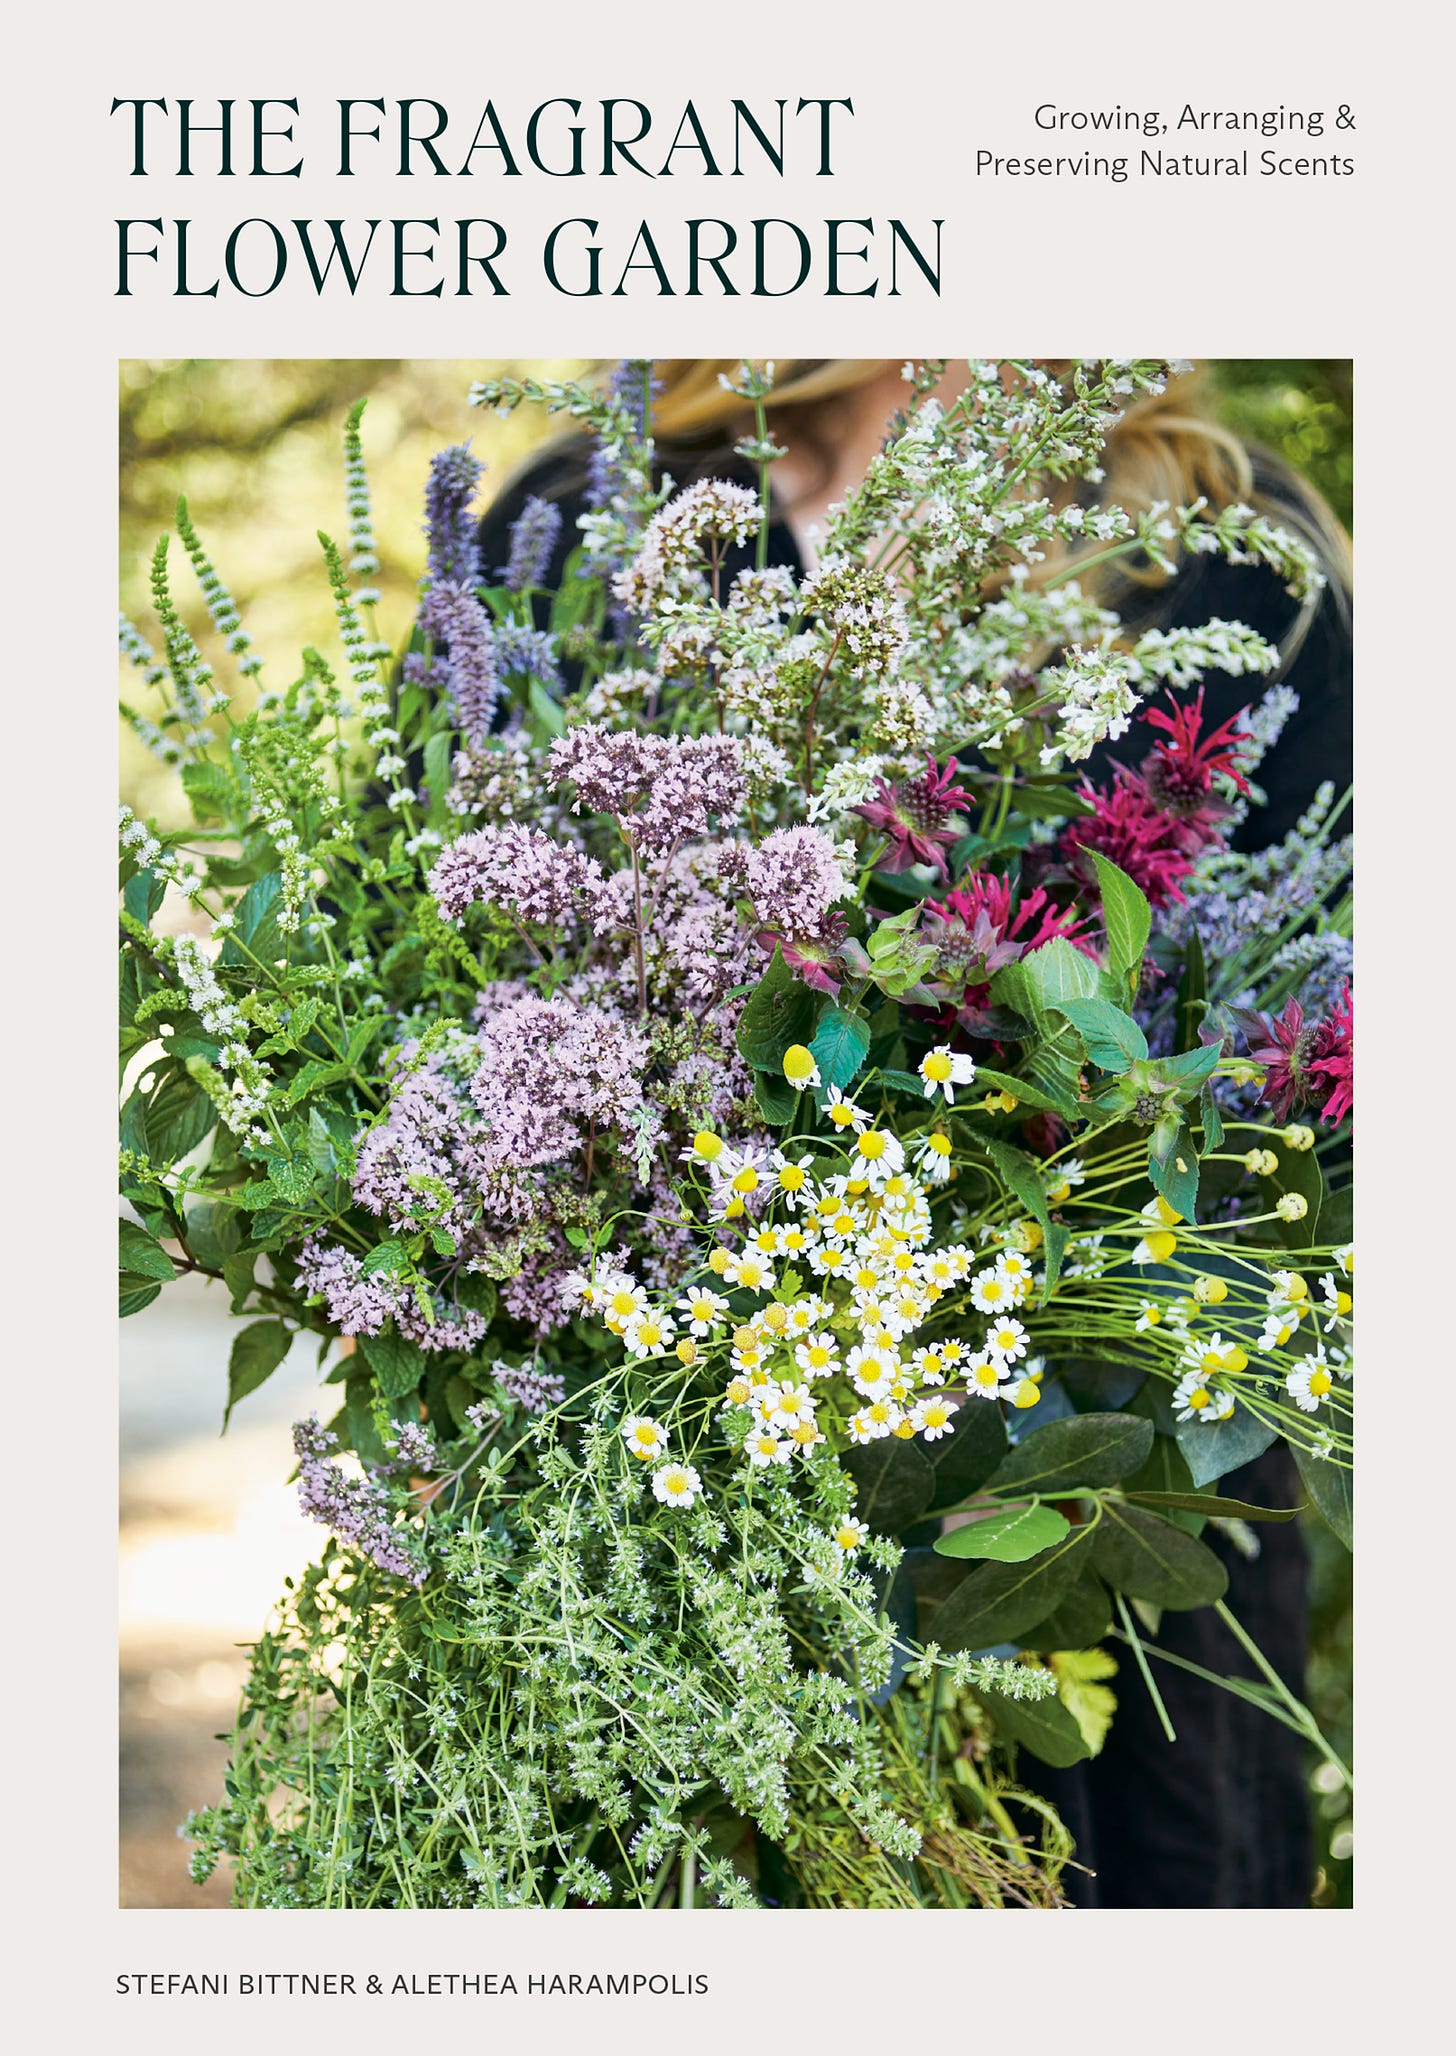 Image of my newest book cover. A bouquet of chamomile, mint, oregano, anise hyssop, bee bomb, lavender, bay laurel, and thyme - all fragrant and edible plants!